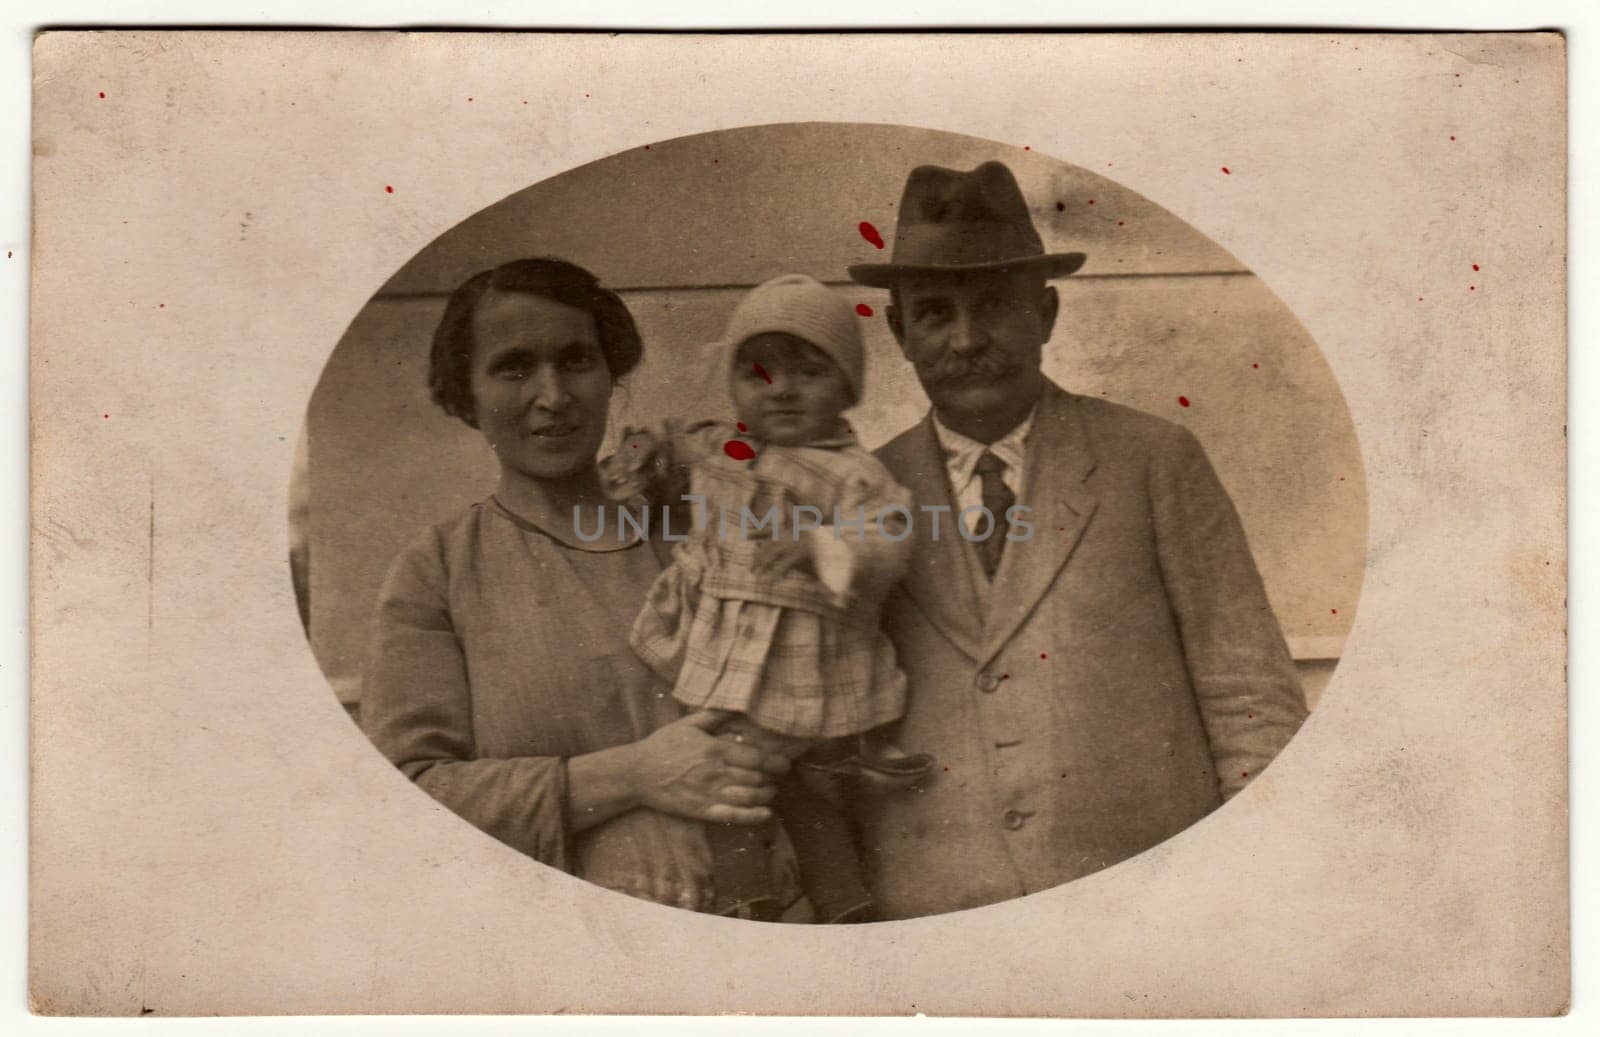 KOVCIN U OLSAN, THE CZECHOSLOVAK REPUBLIC - DECEMBER 20, 1923: Vintage photo shows mother holds a small baby and father. Retro black and white photography. Circa 1920.